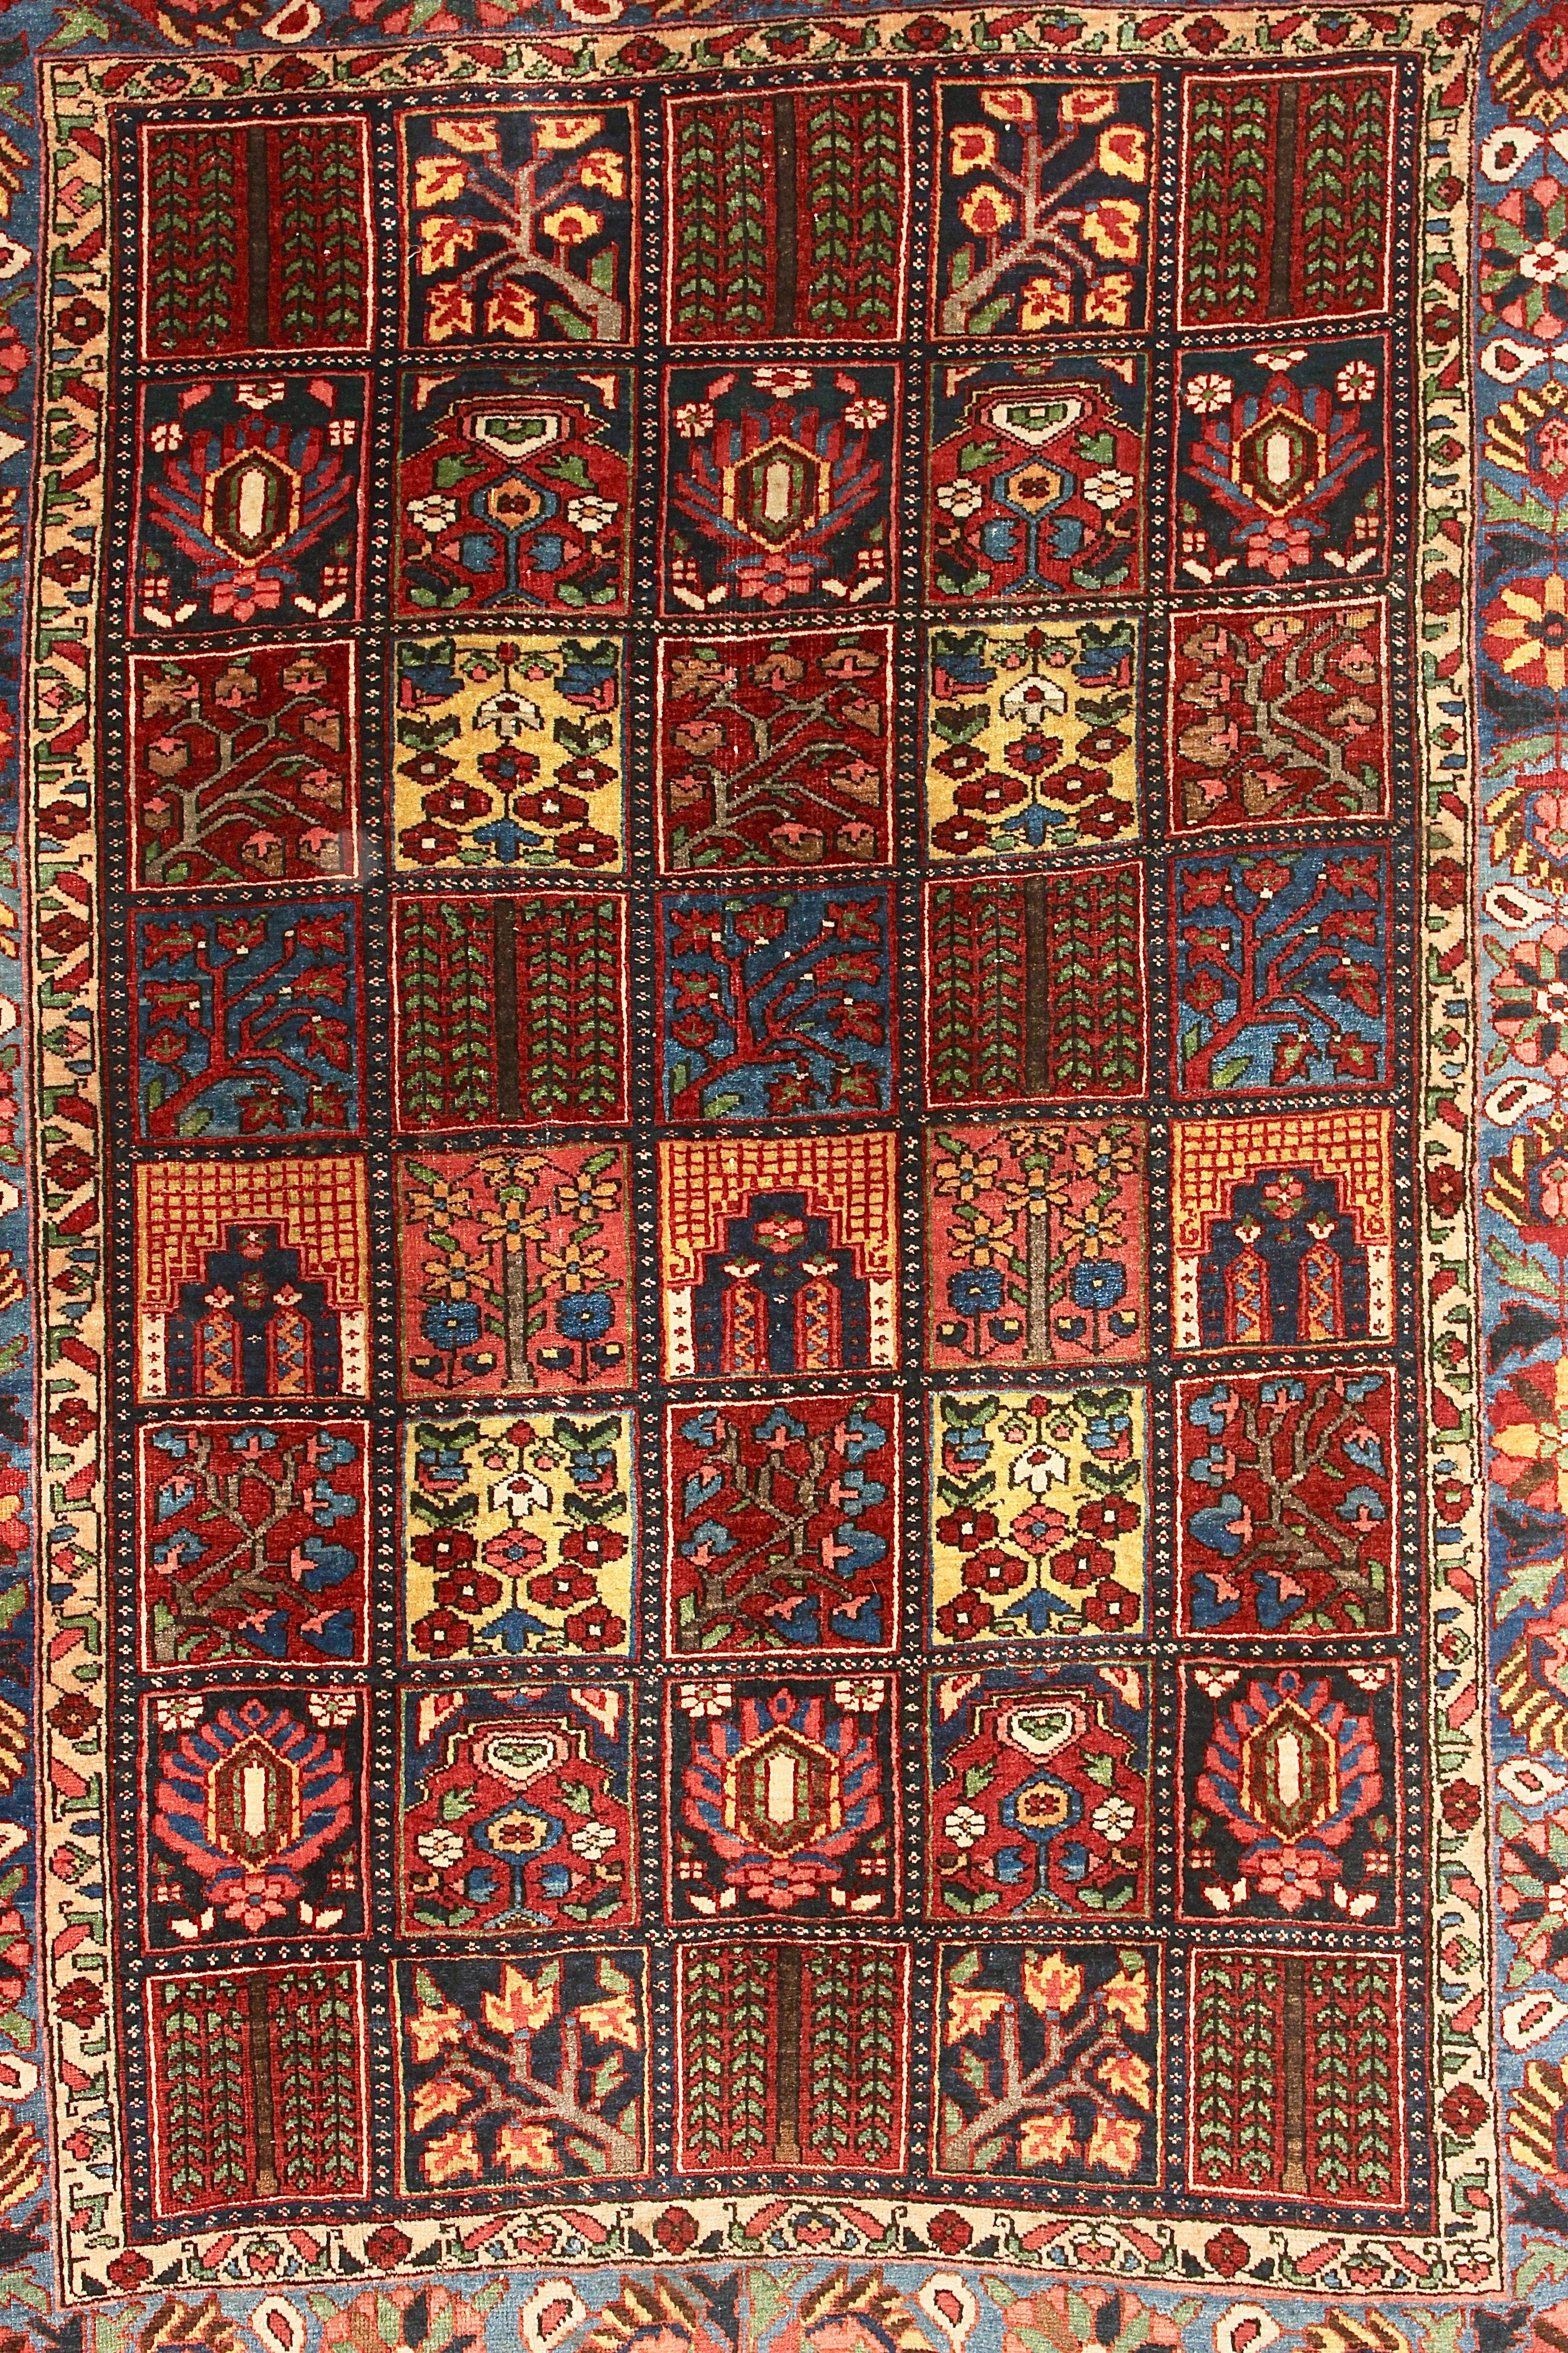 High quality, antique orient rug. Carpet.

Hand knotted. Strong natural colors. Beautiful pattern.
The carpet is in an age-related condition.

The images are part of the article description.

On request, we clean the carpet professionally and